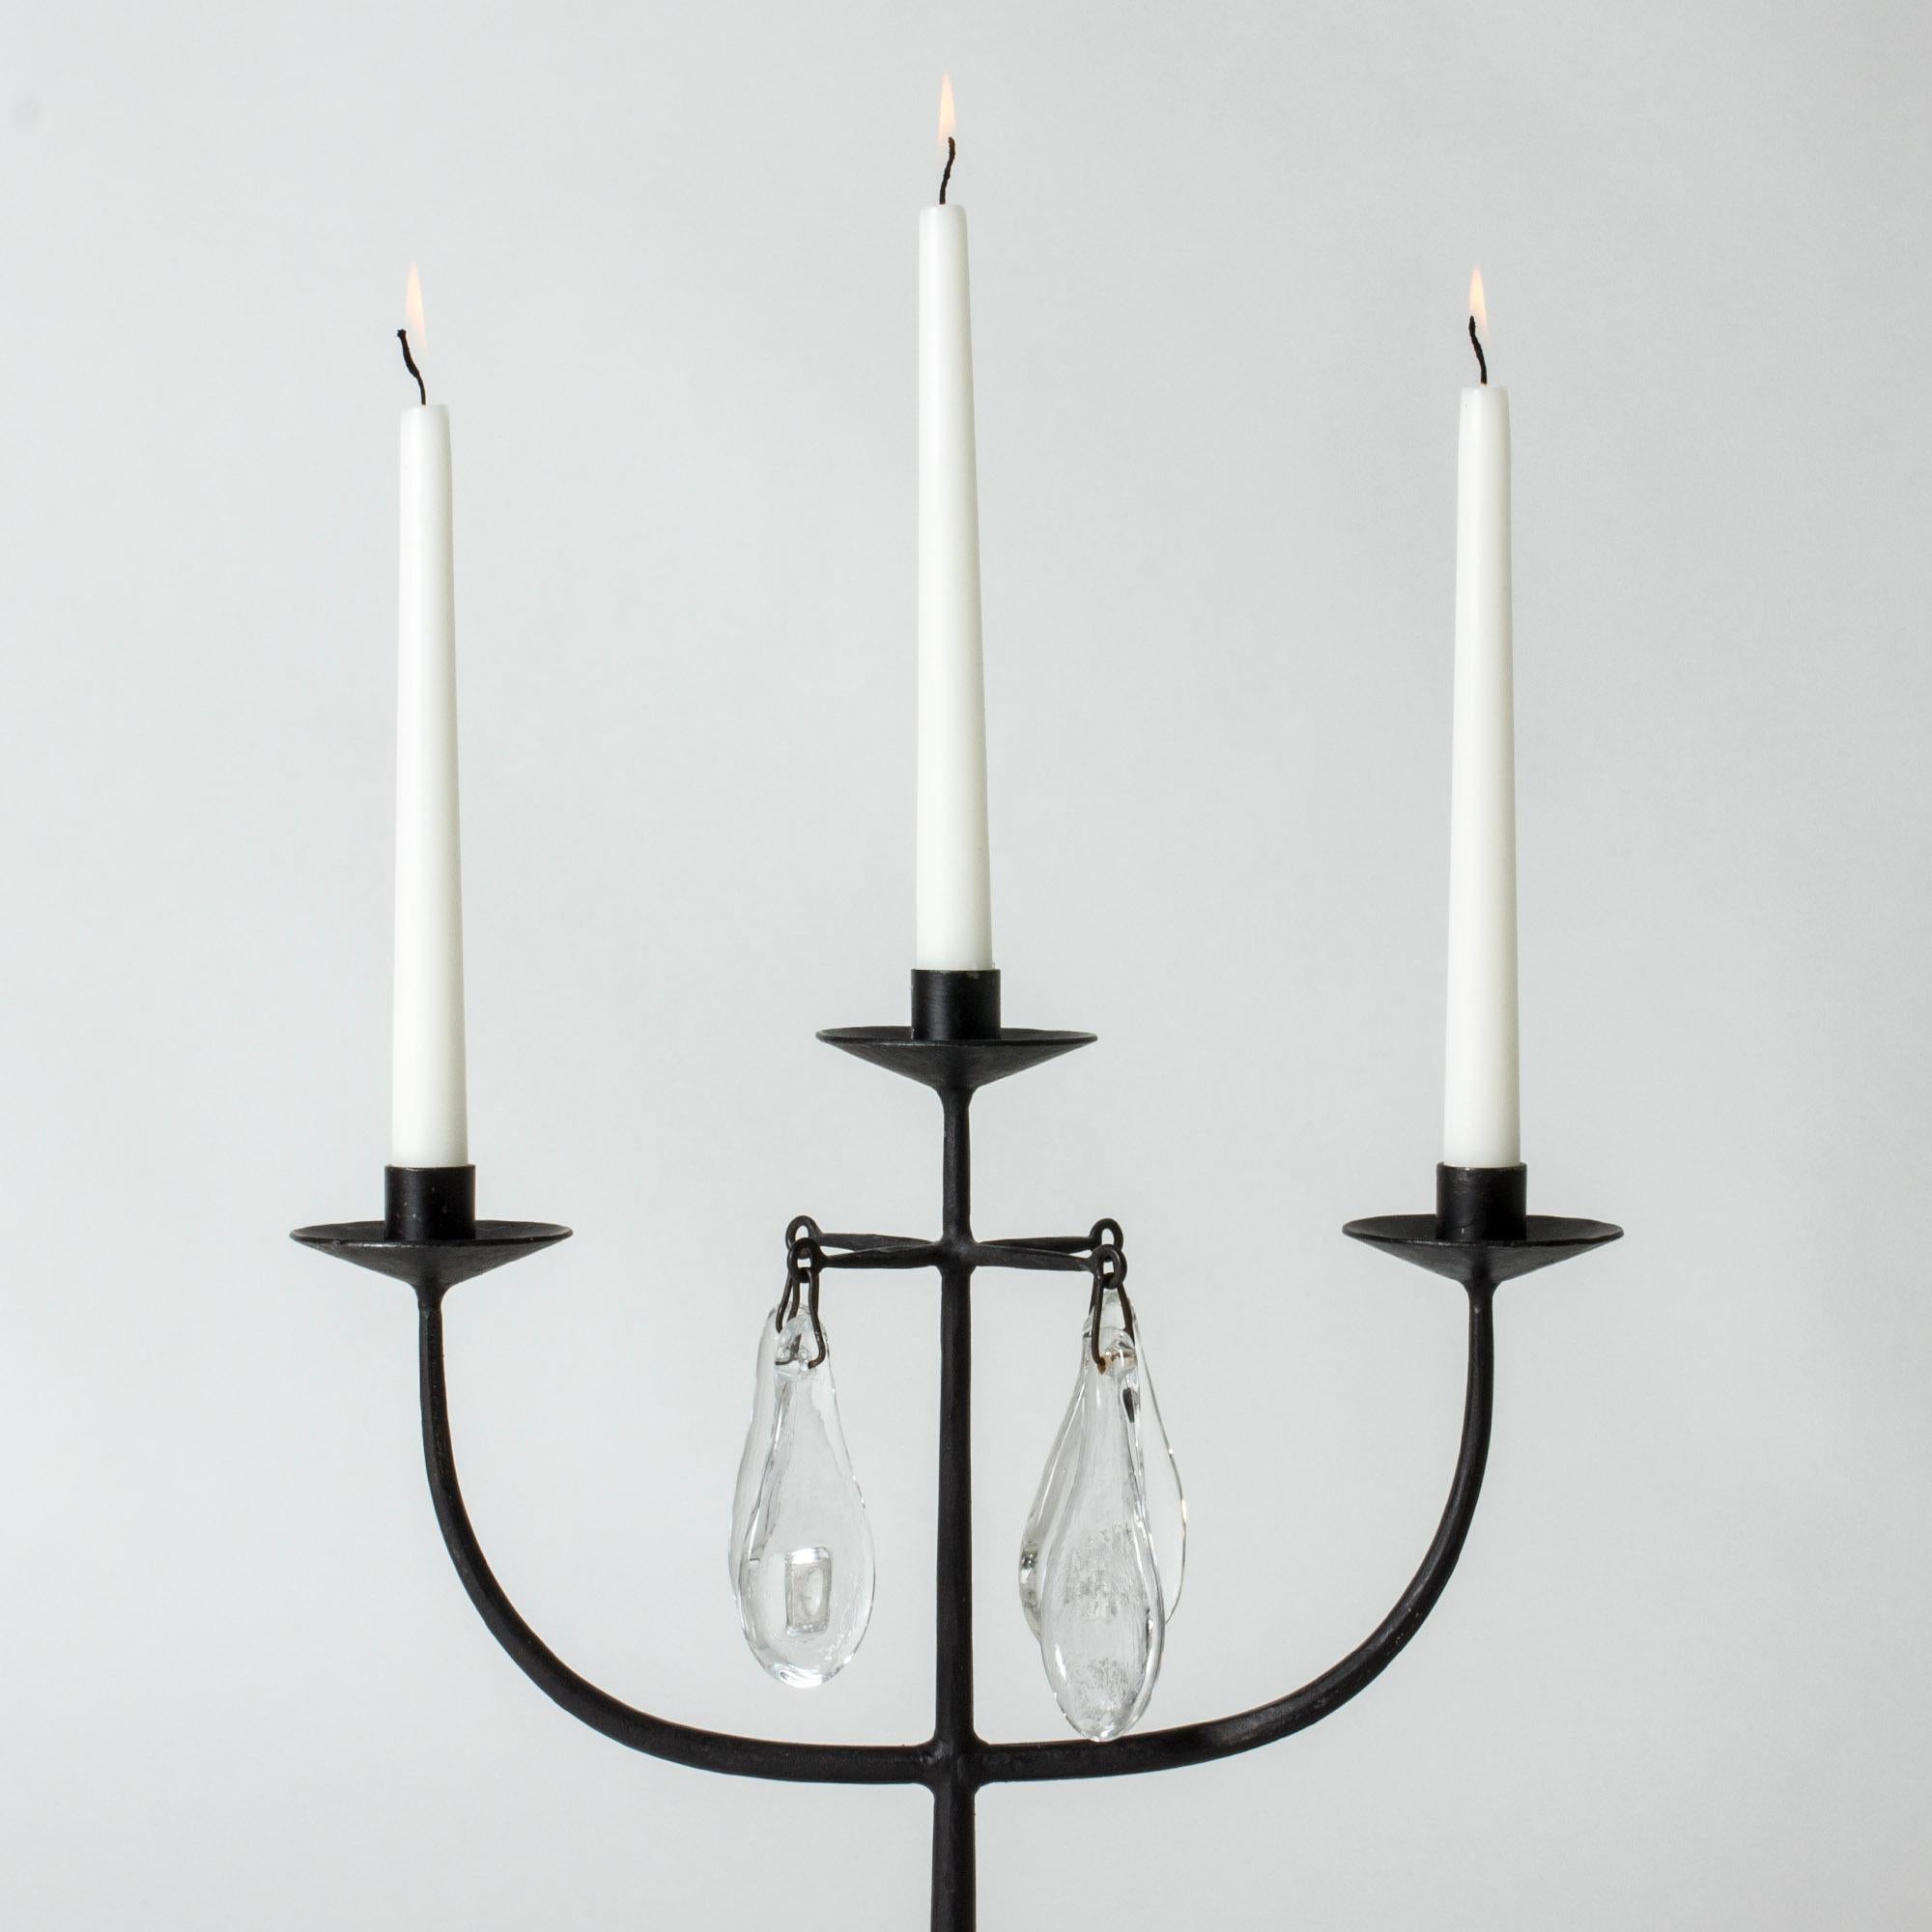 Beautiful candelabra by Erik Höglund, made from wrought iron and glass. The rustic iron stem is adorned with four pear shaped glass medallions that bring rain drops on a bare tree to mind. Fits regular candles.

Erik Höglund was one of Sweden’s